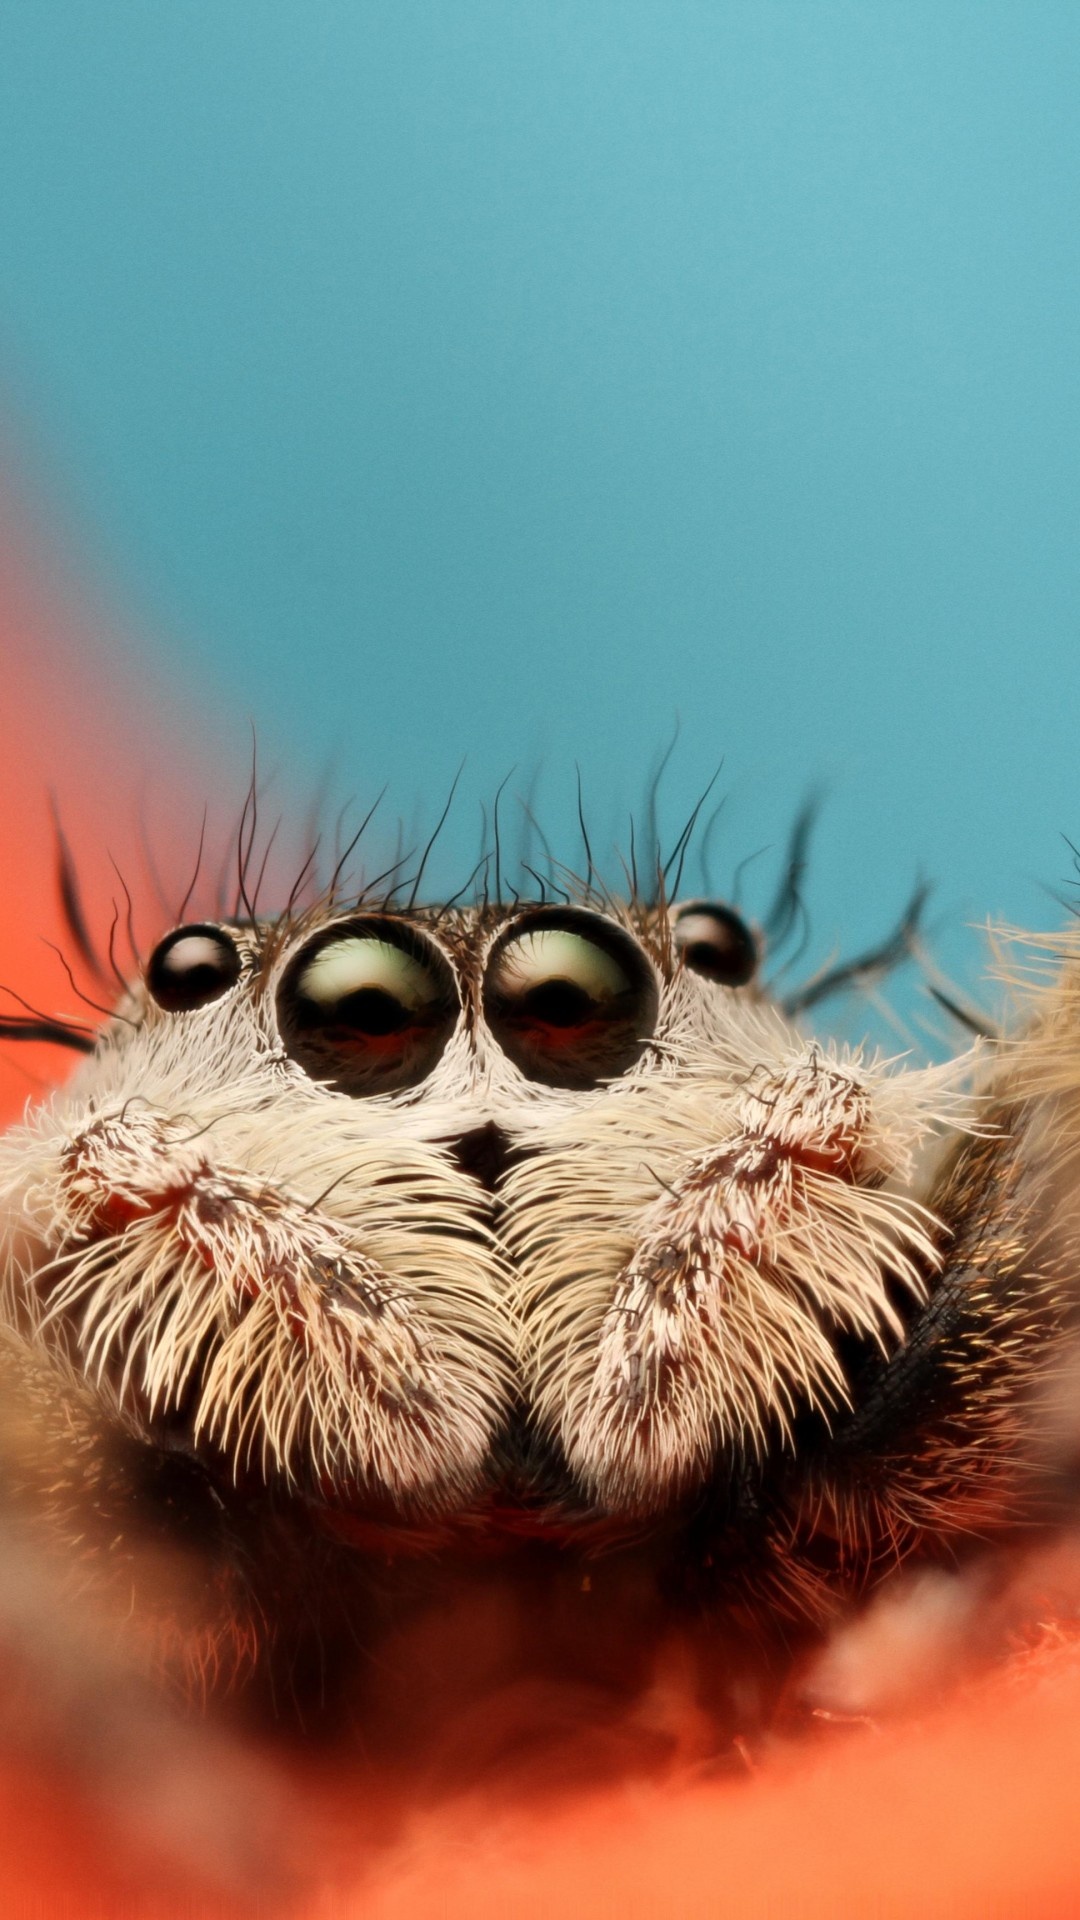 Jumping spider wallpaper, High-resolution images, Macro photography, Wall-worthy, 1080x1920 Full HD Phone